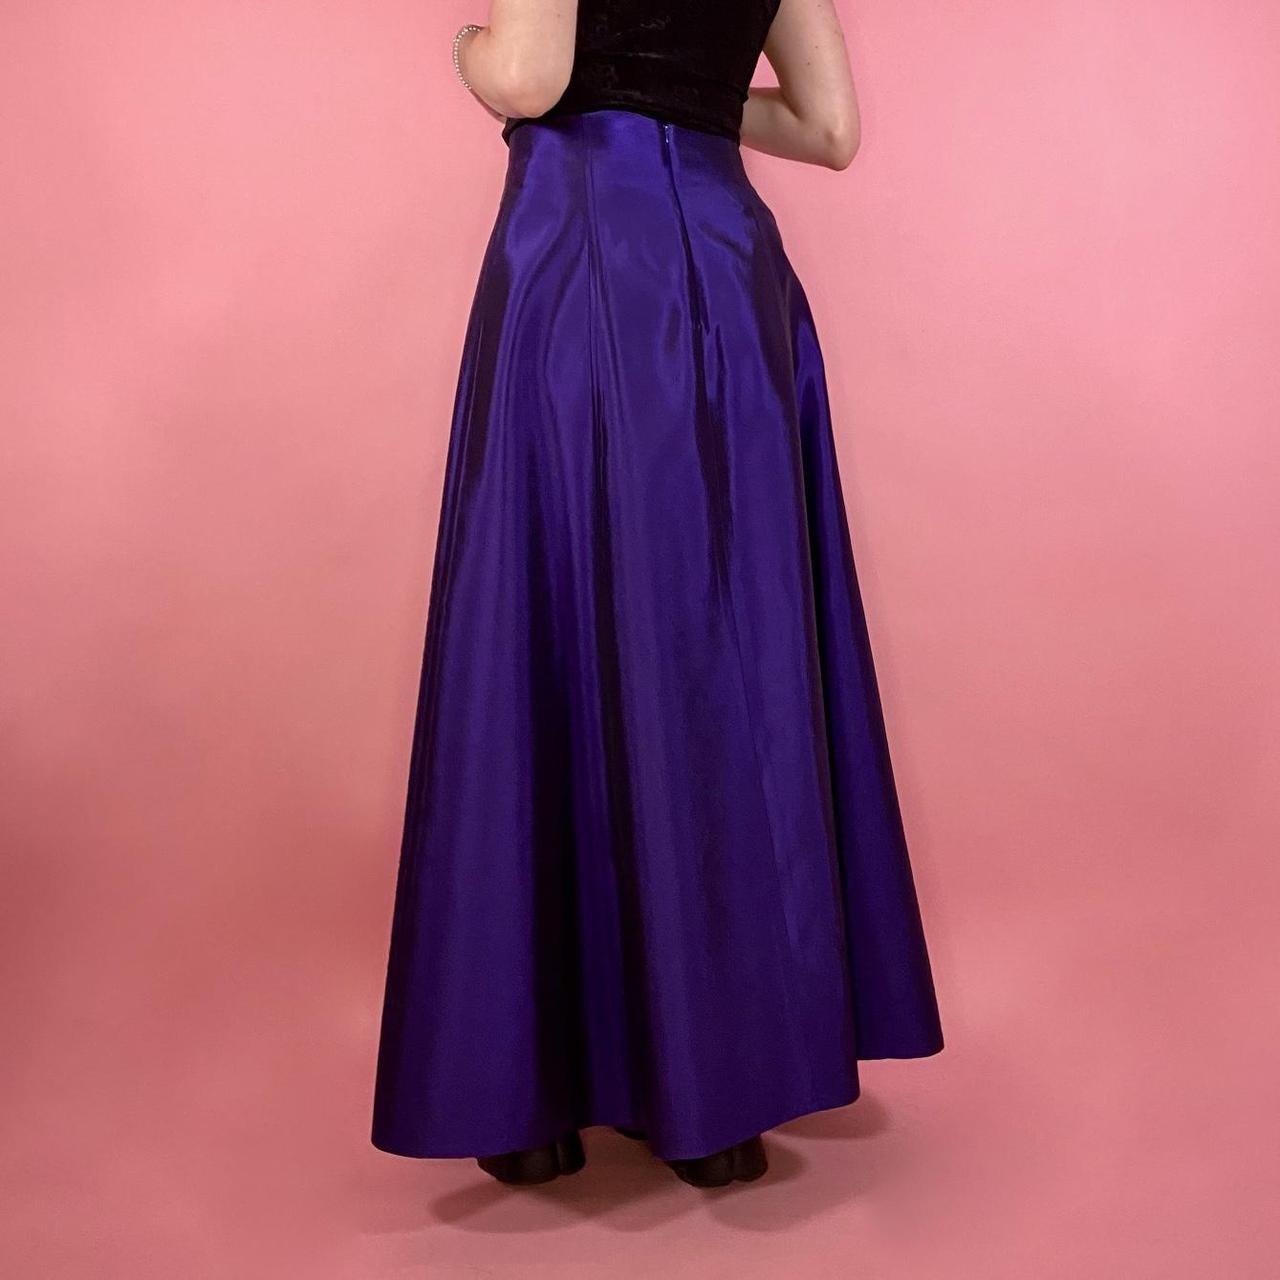 Product Image 3 - Vintage iridescent maxi skirt

From the